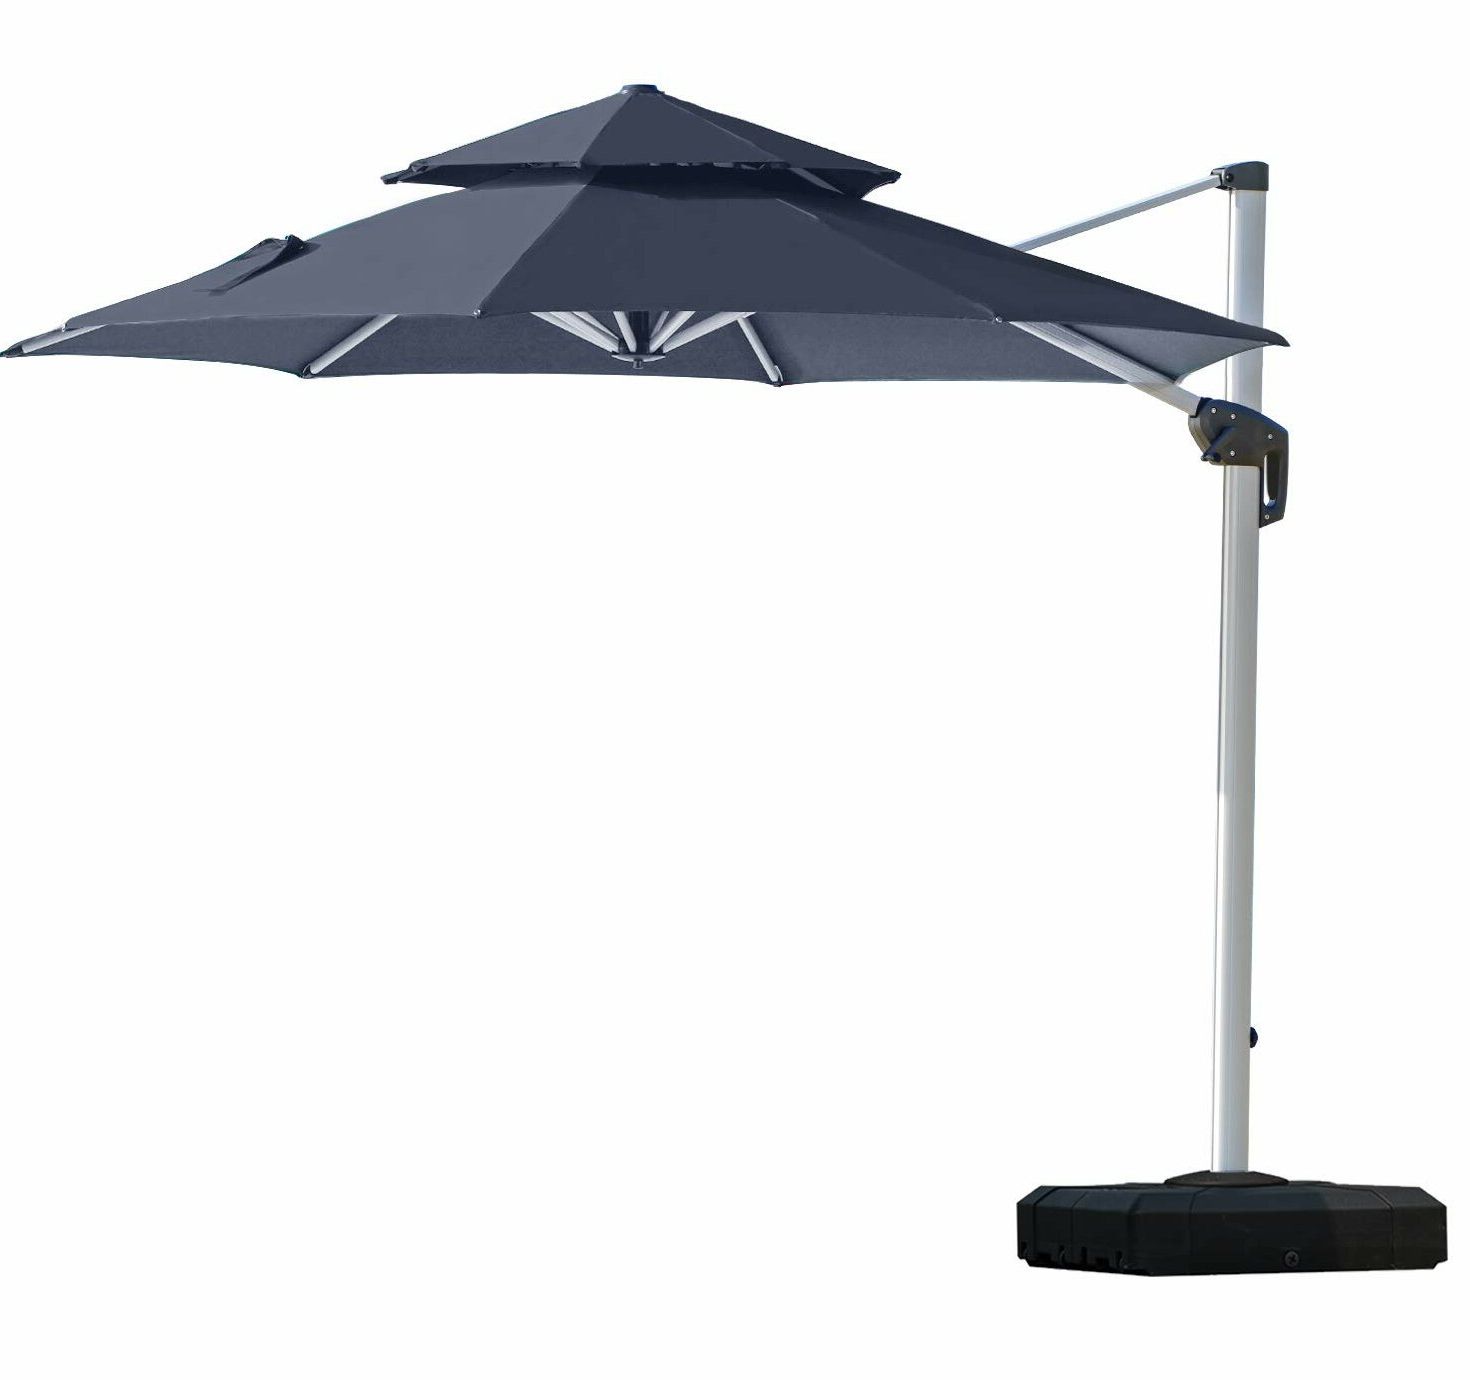 Most Recently Released Mablethorpe Cantilever Umbrellas For Lytham 10' Cantilever Umbrella (View 3 of 20)